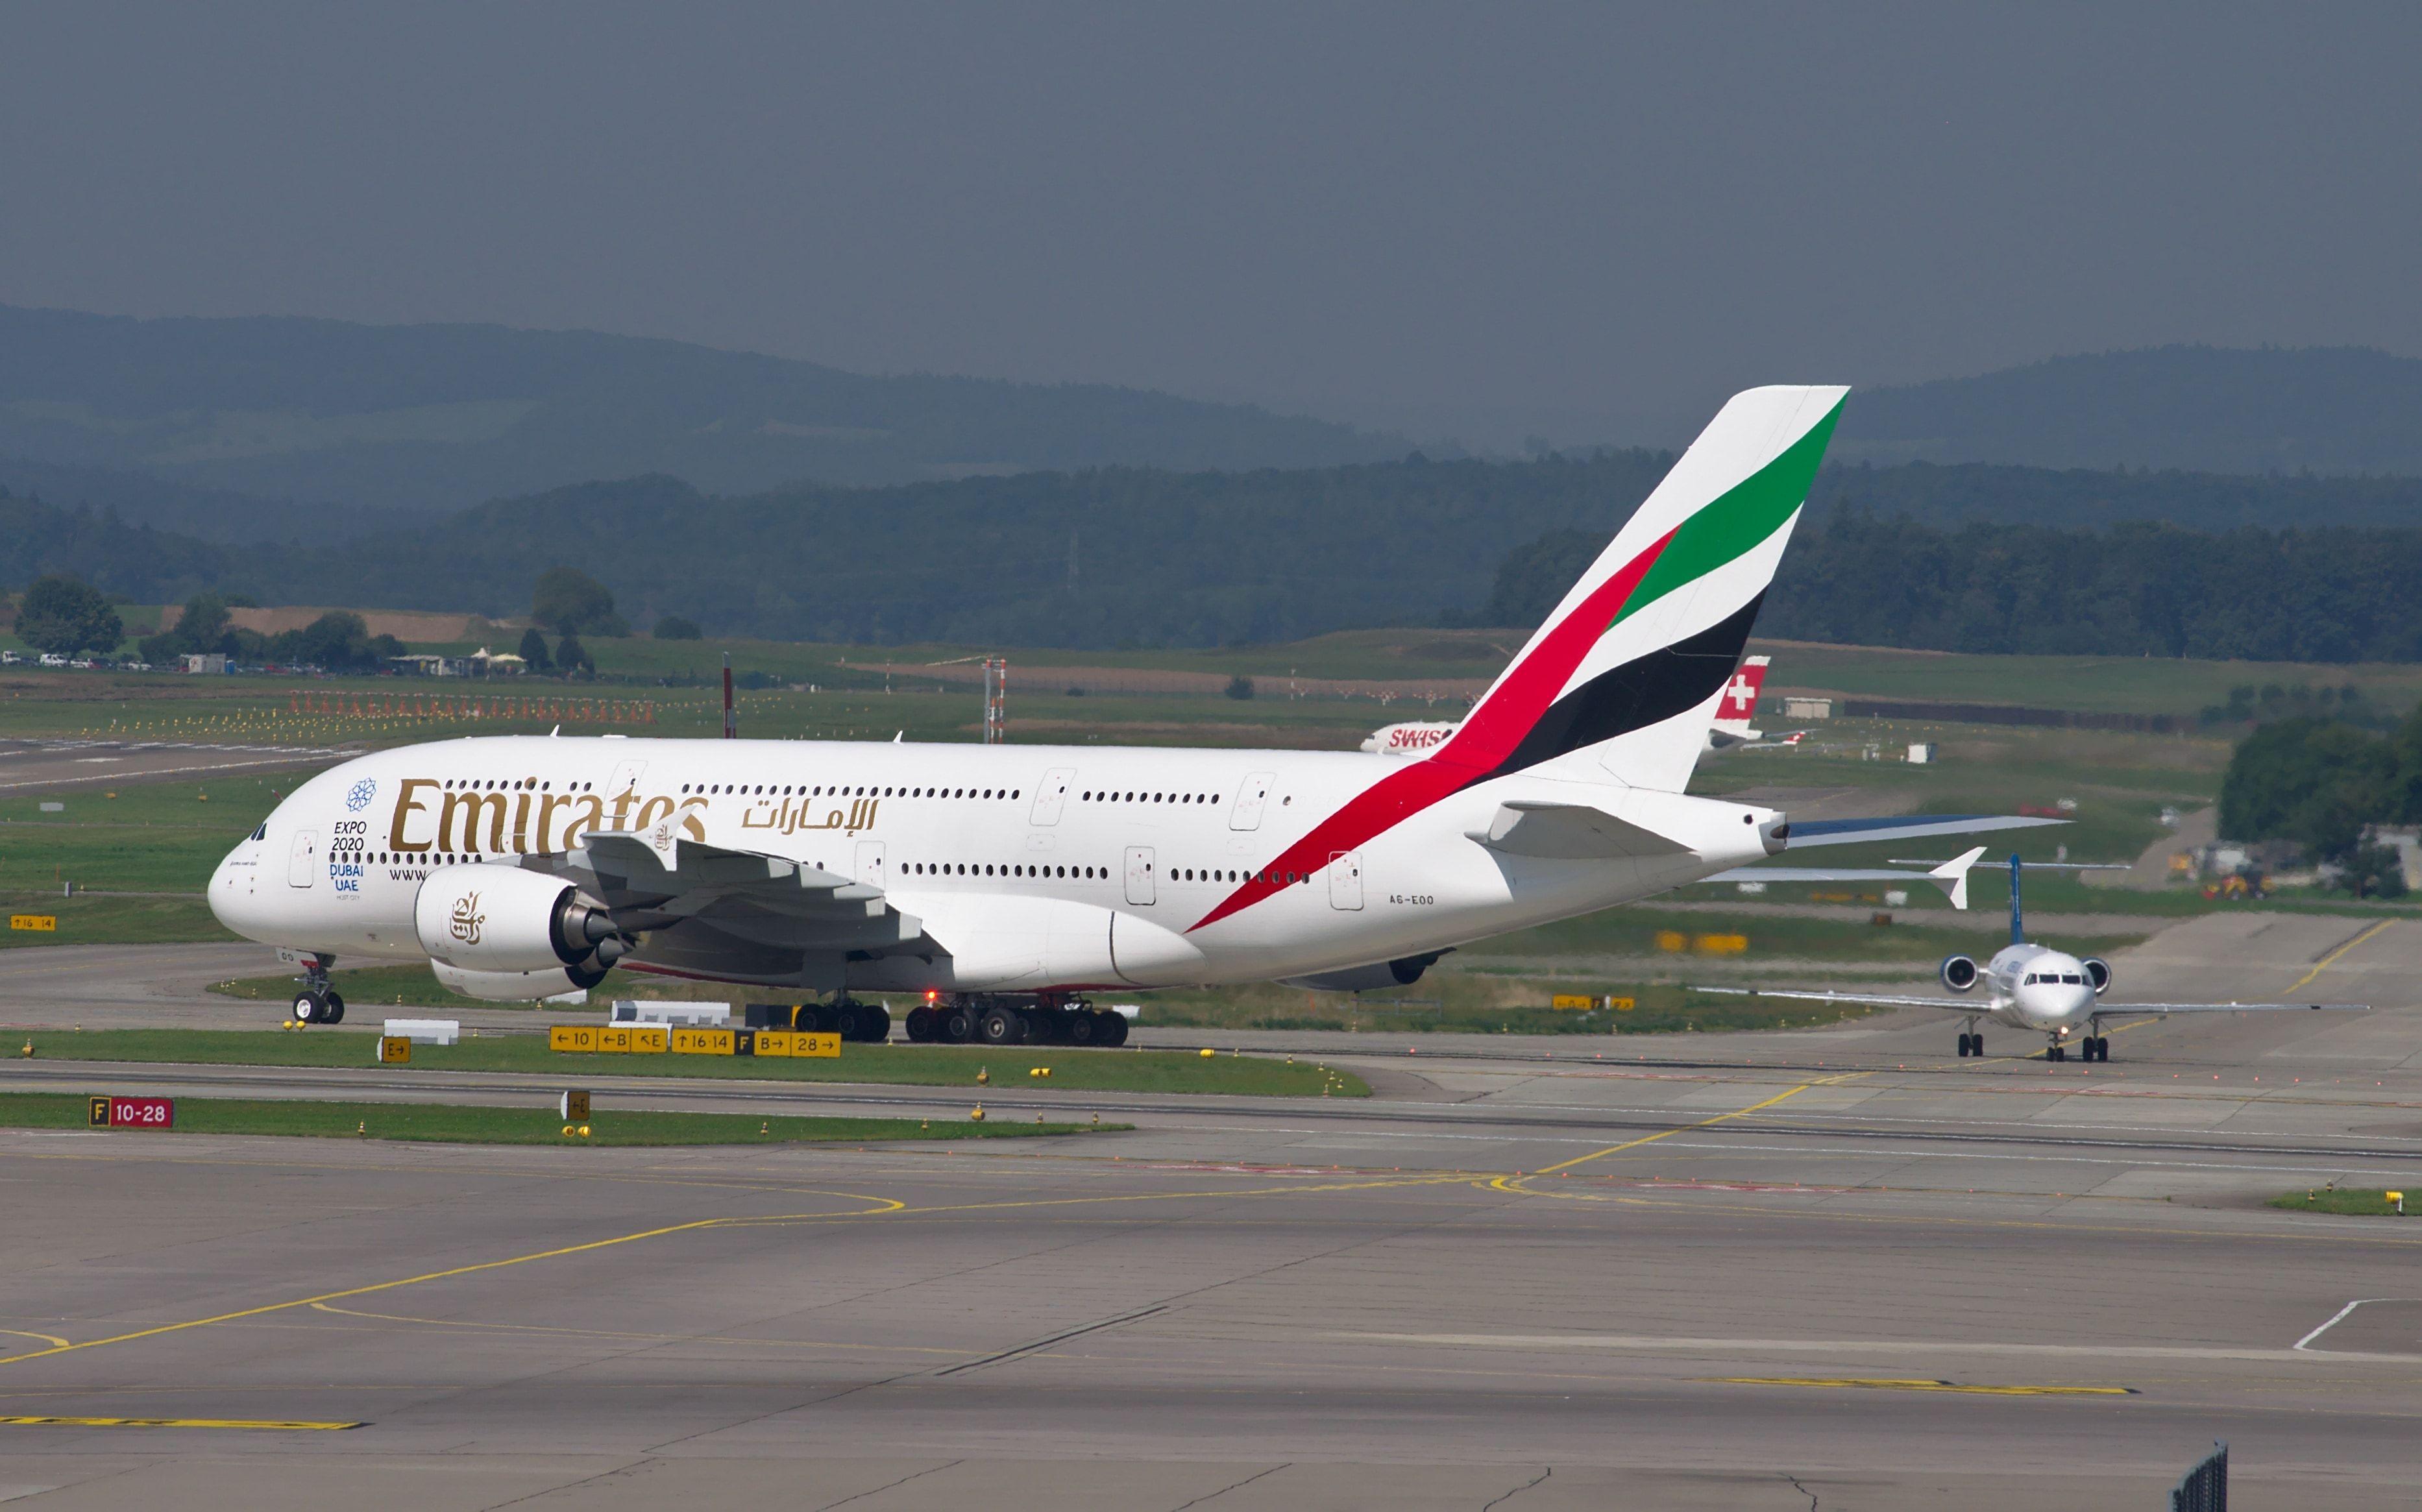 A Green and Red Airline Logo - white green red and black emirates airplane free image